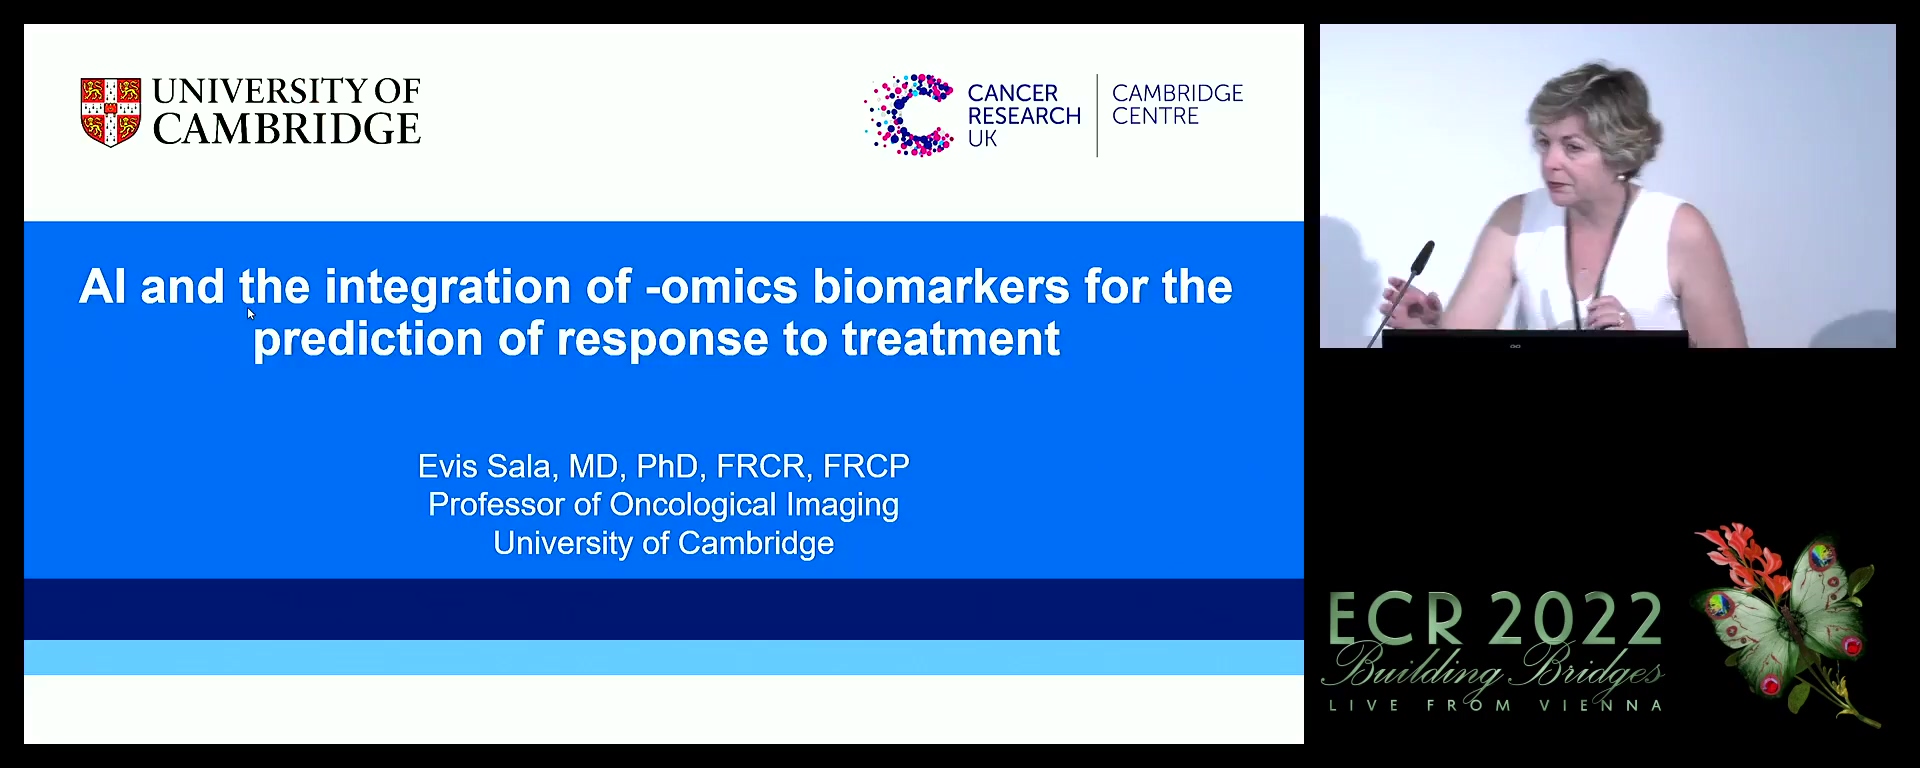 AI and the integration of -omics biomarkers for the prediction of response to treatment